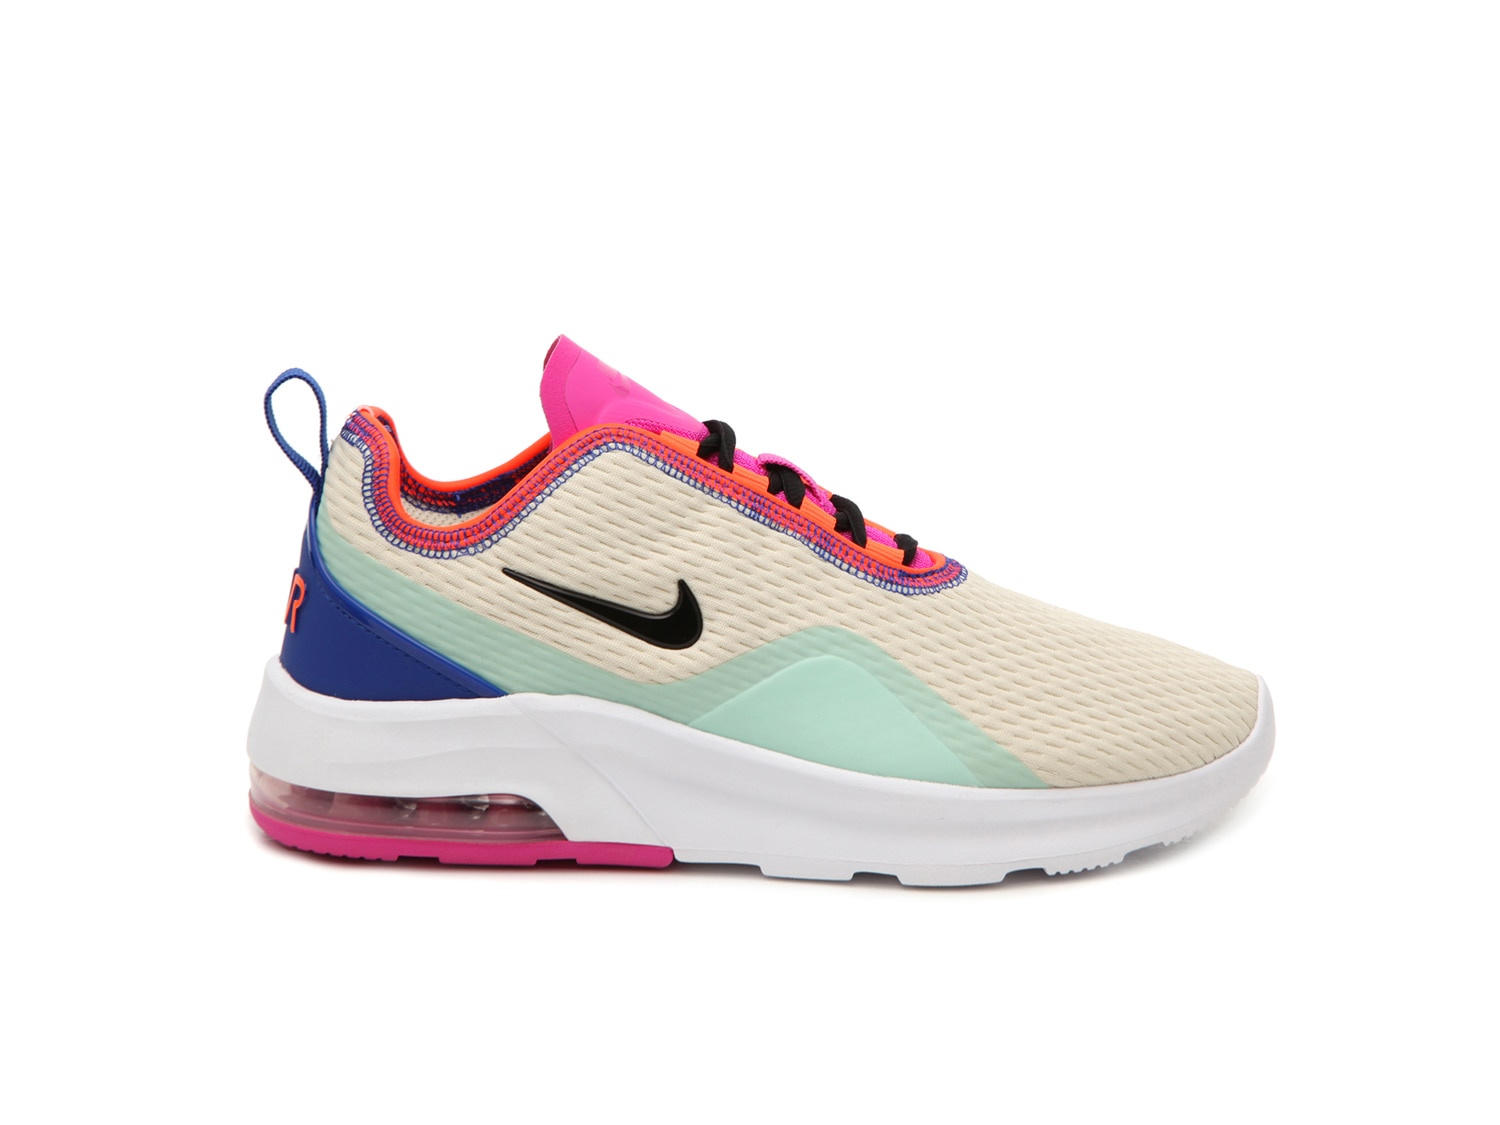 wmns air max motion 2 sneakers